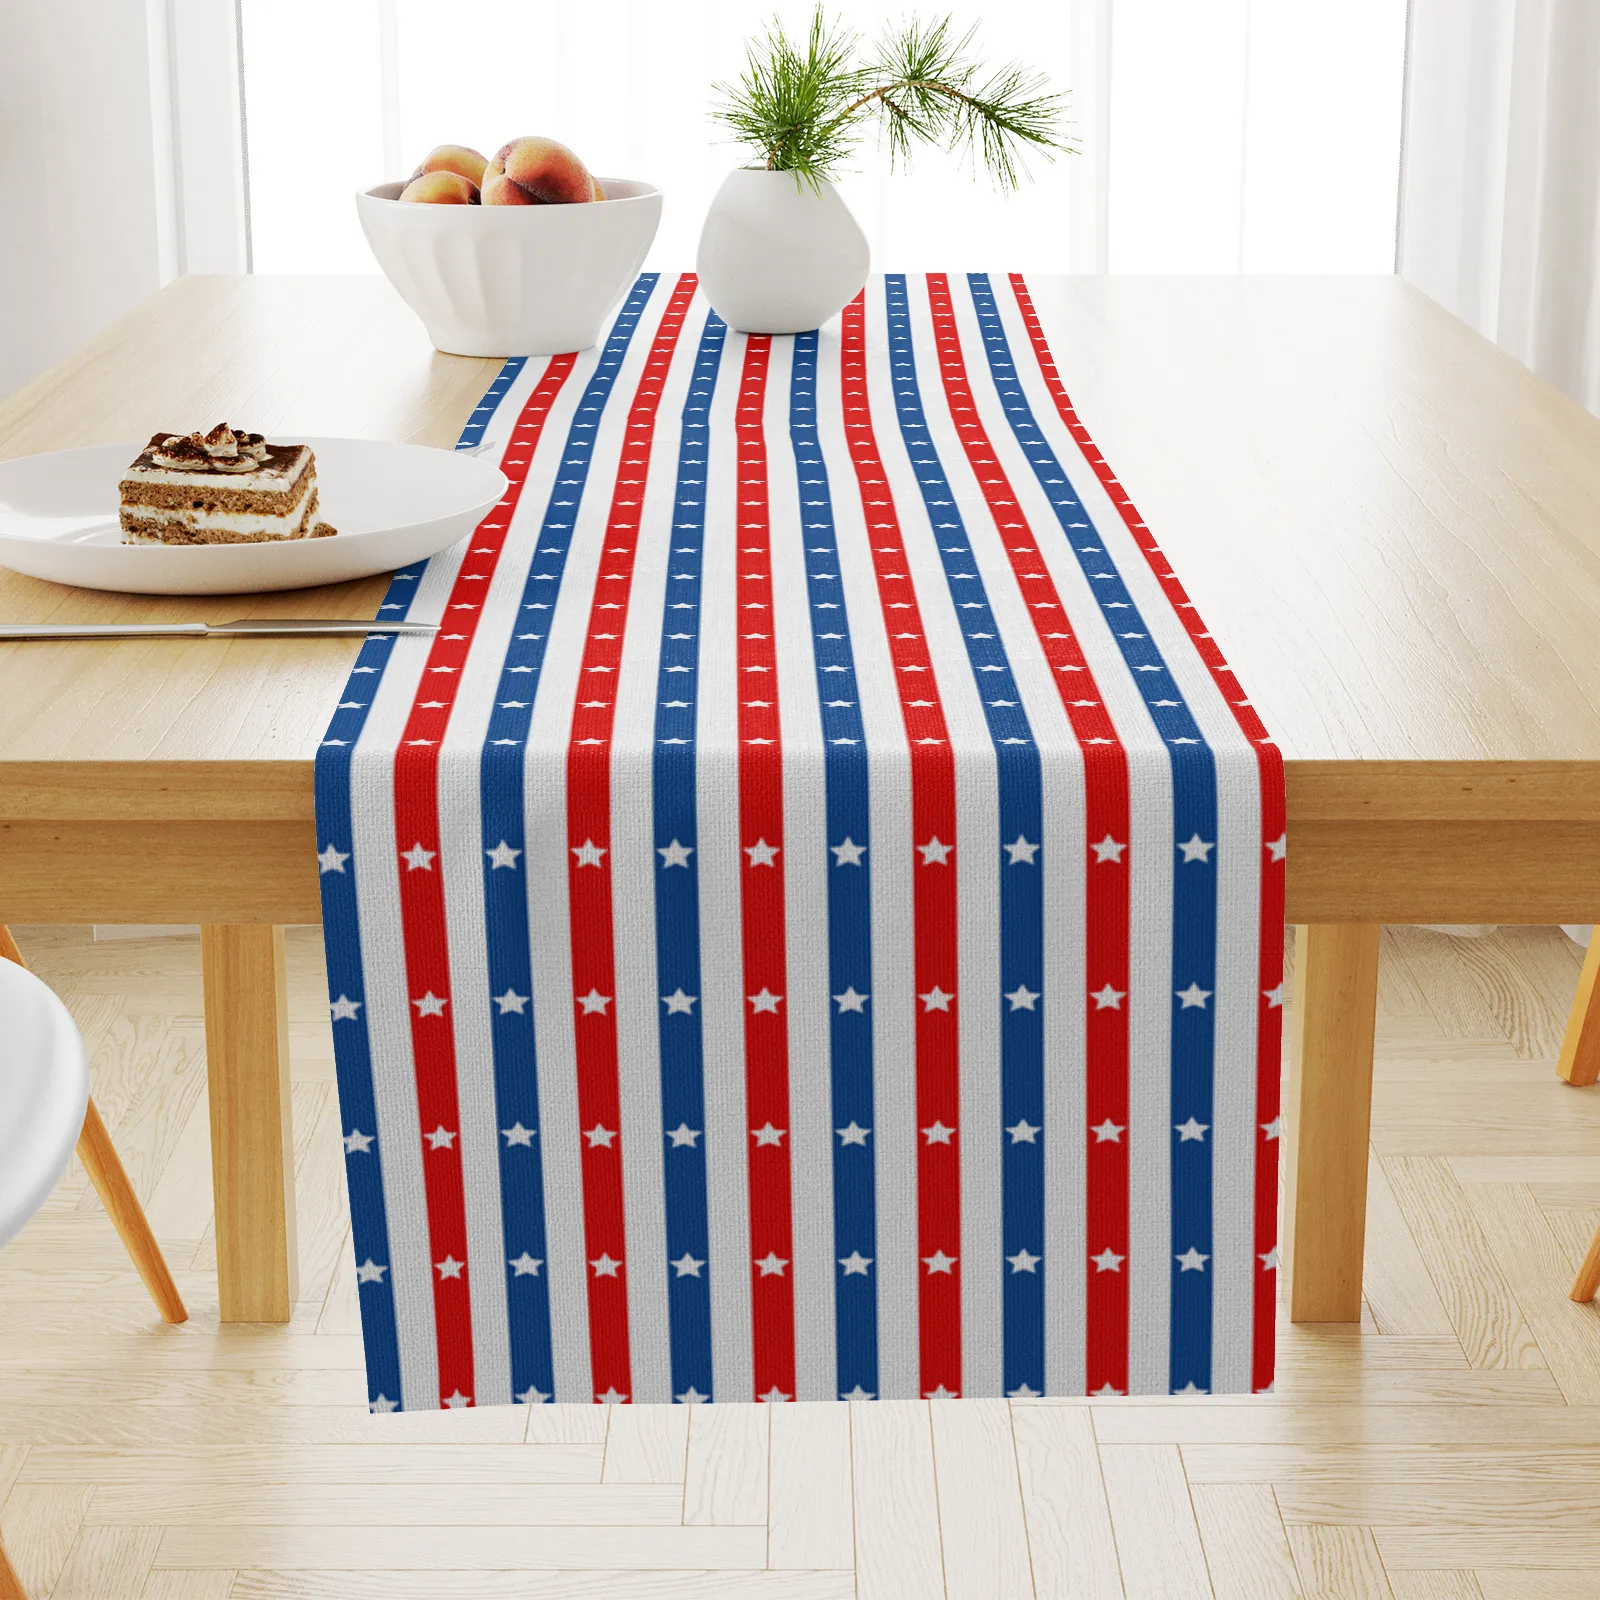 American Independence Day Linen Printed Table Runner American Living Room Dining Table Decorative Cloth Festival Coffee Table Cloth